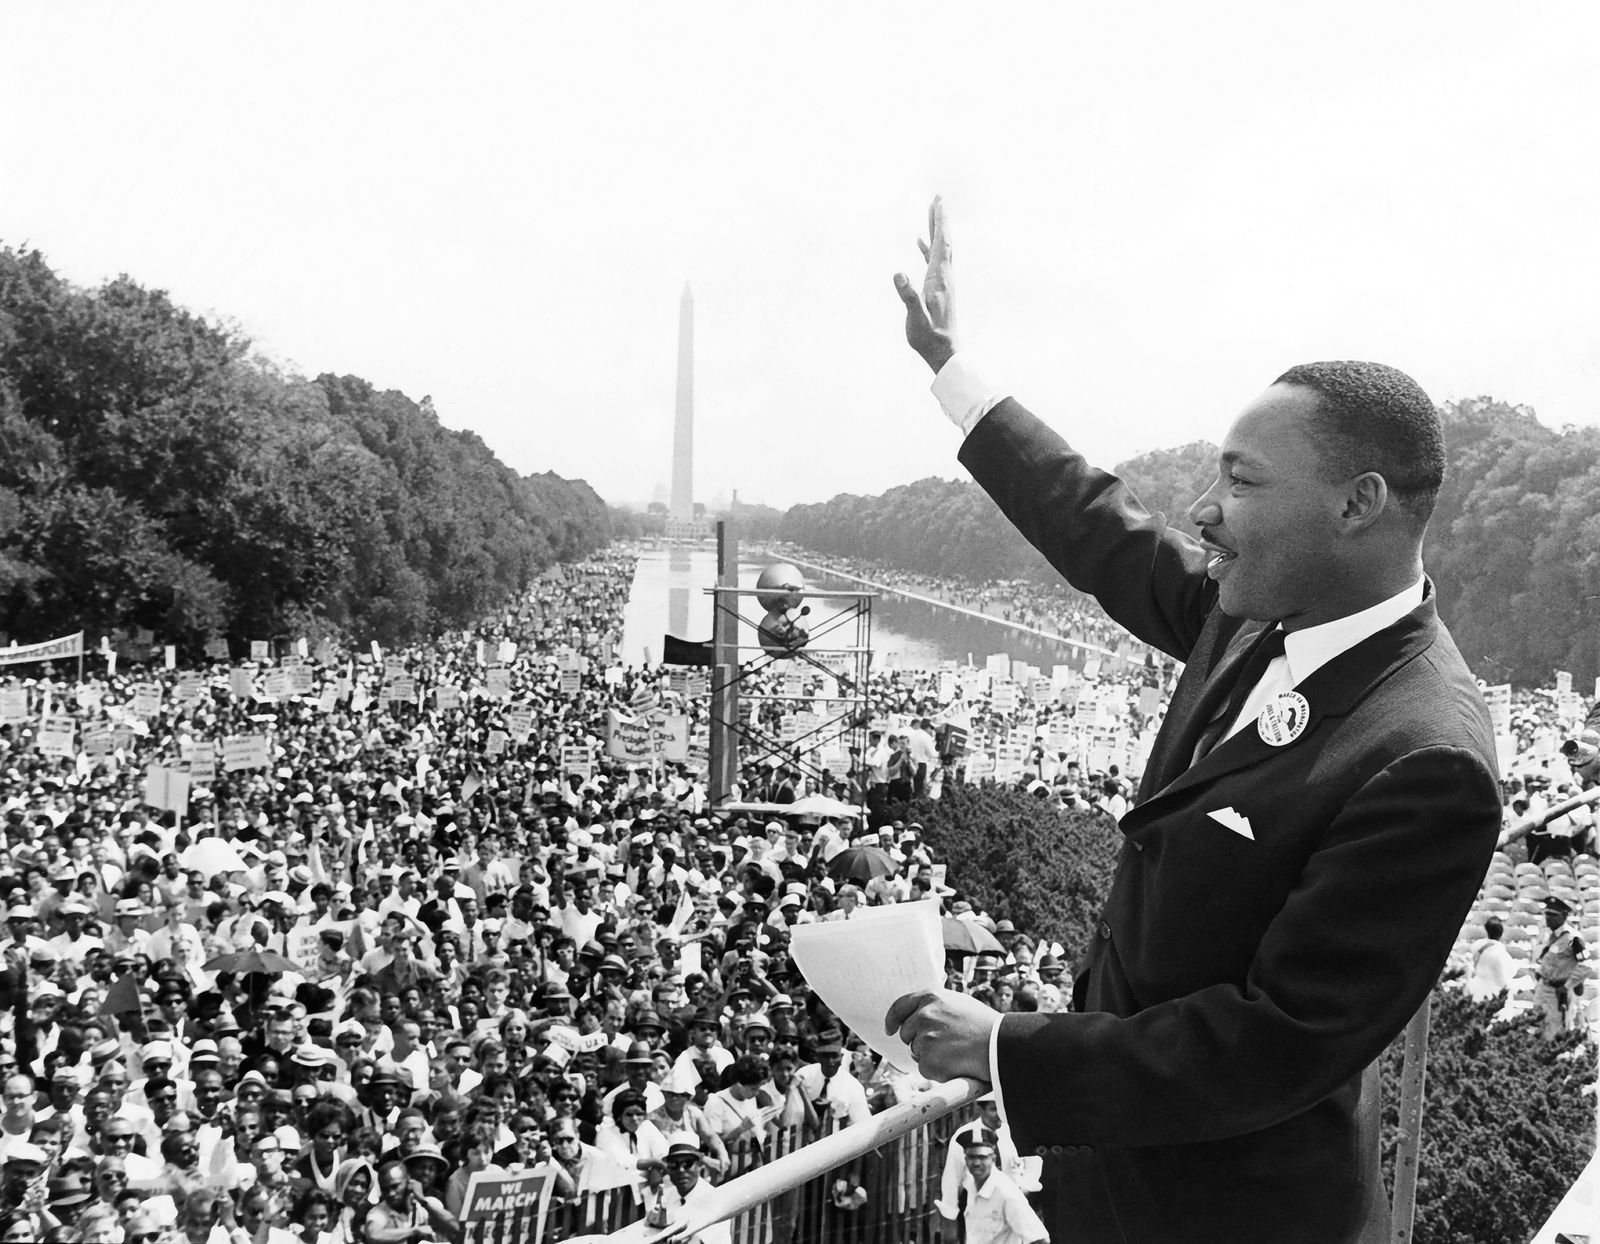 To Mark the 60th Anniversary of the March on Washington, Martin